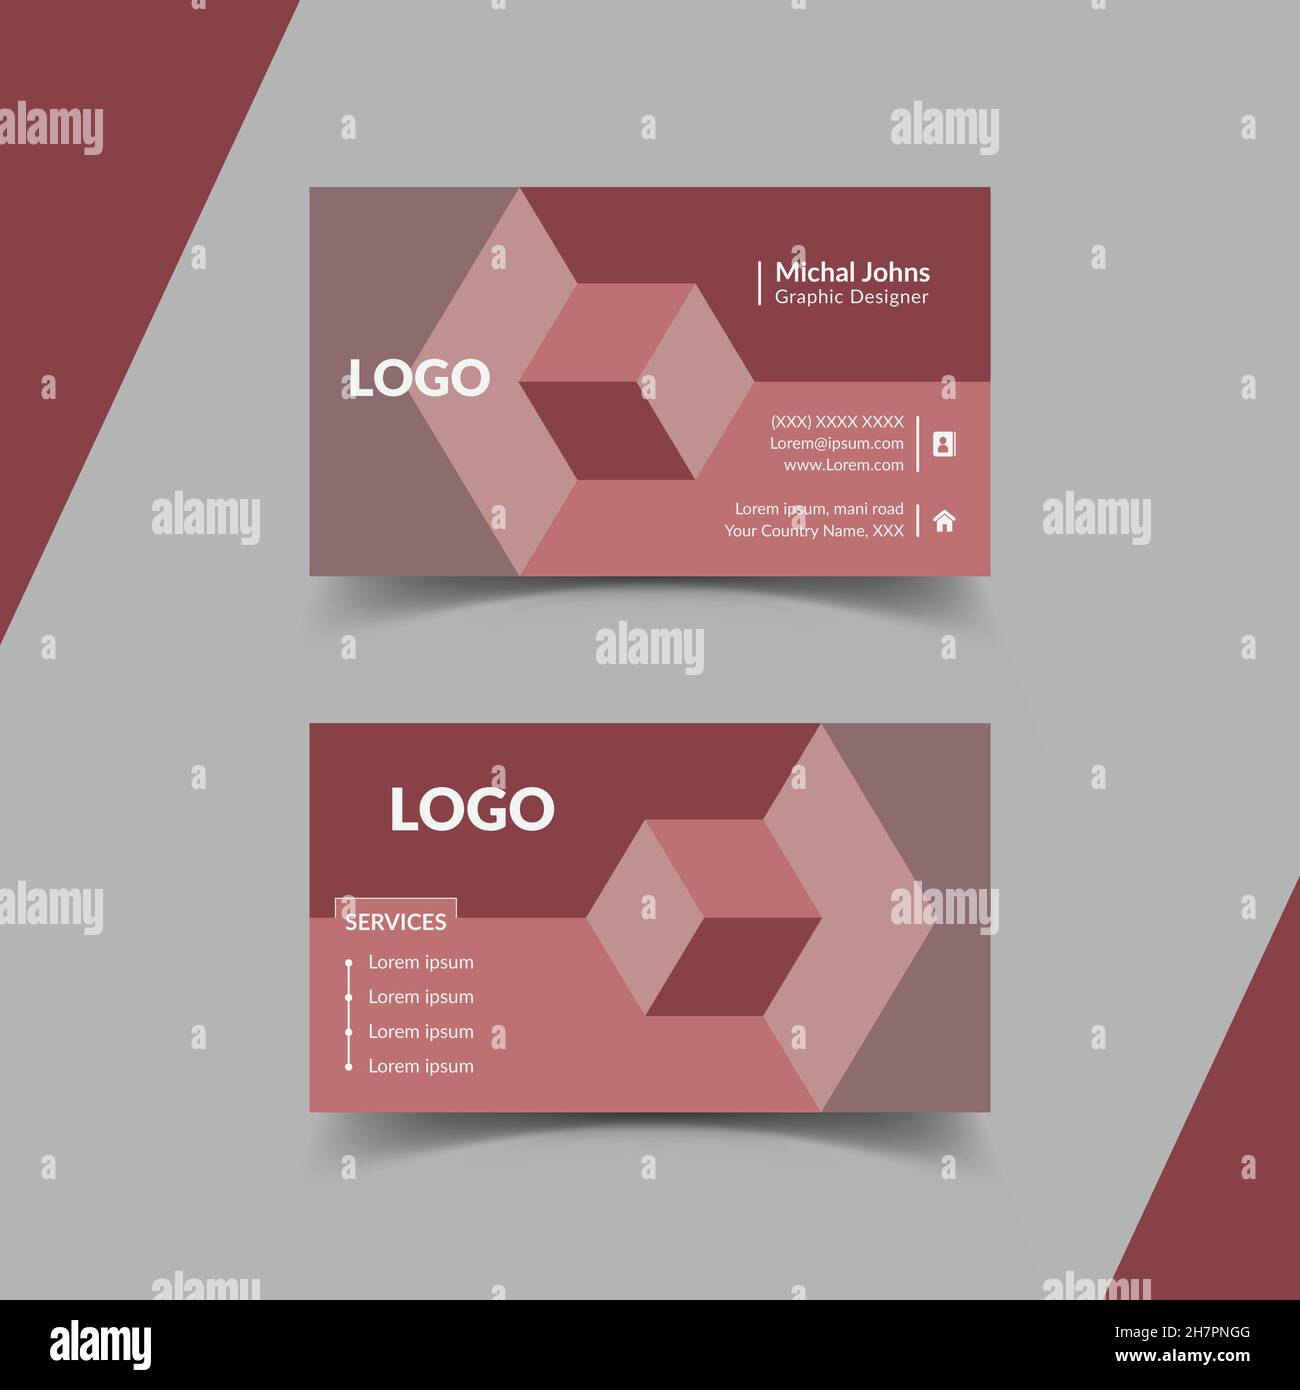 modern-creative-business-card-design-template-and-vector-business